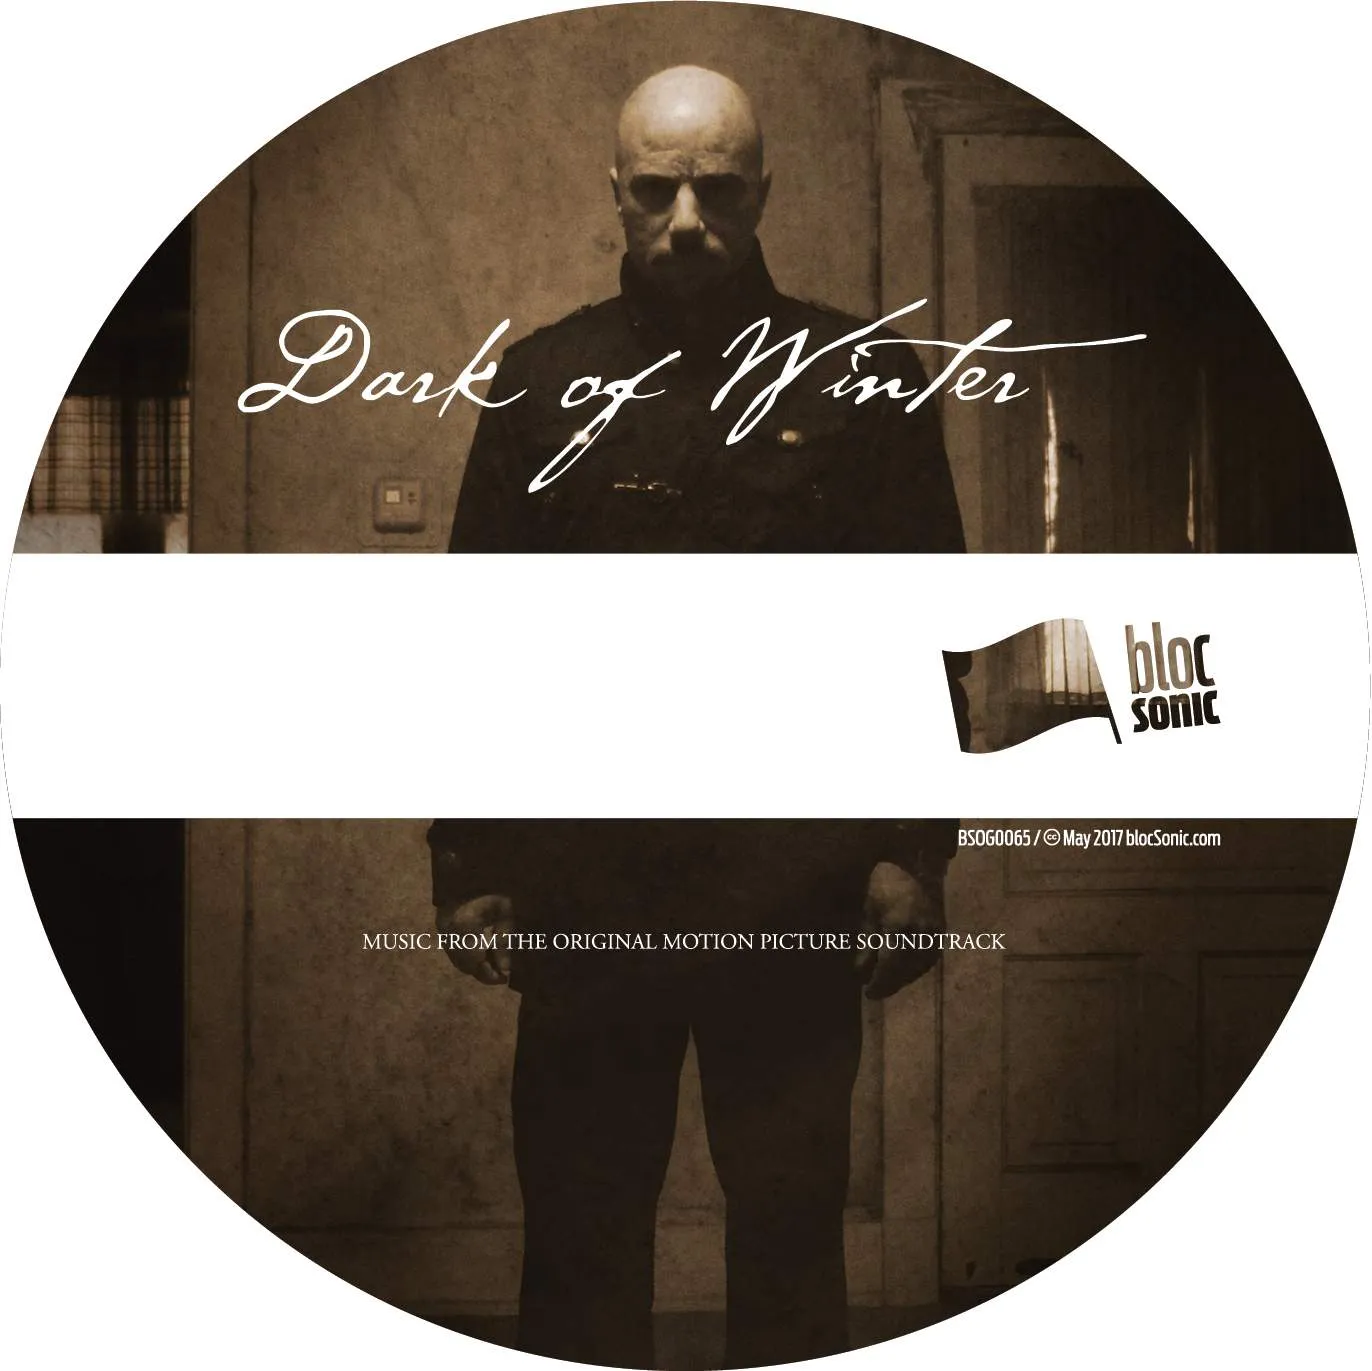 Album disc for “Dark Of Winter: Music From The Original Motion Picture Soundtrack” by Various Artists